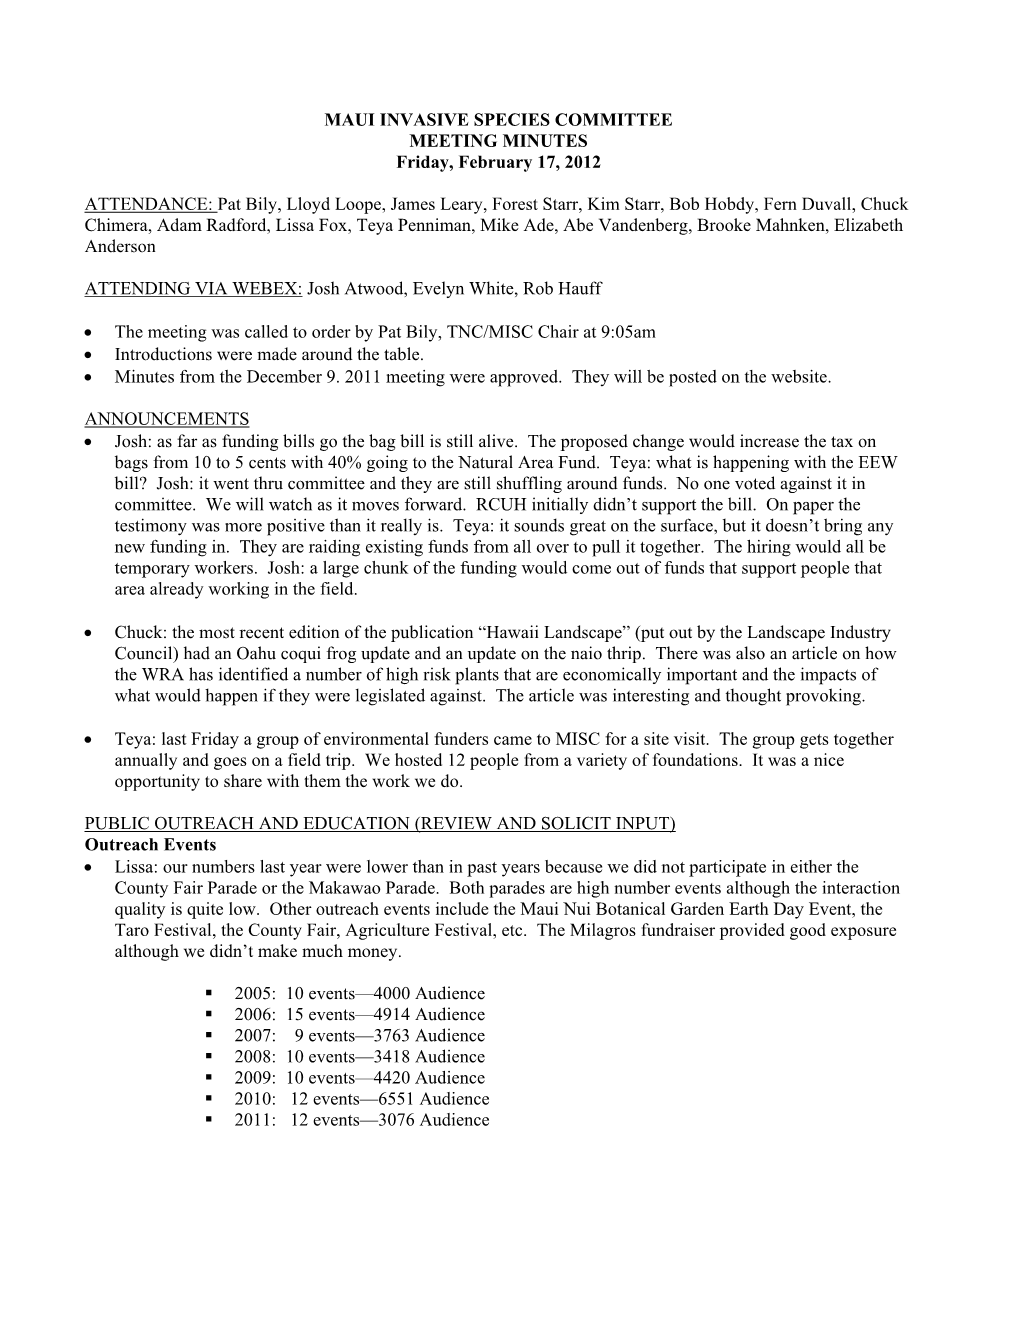 MAUI INVASIVE SPECIES COMMITTEE MEETING MINUTES Friday, February 17, 2012